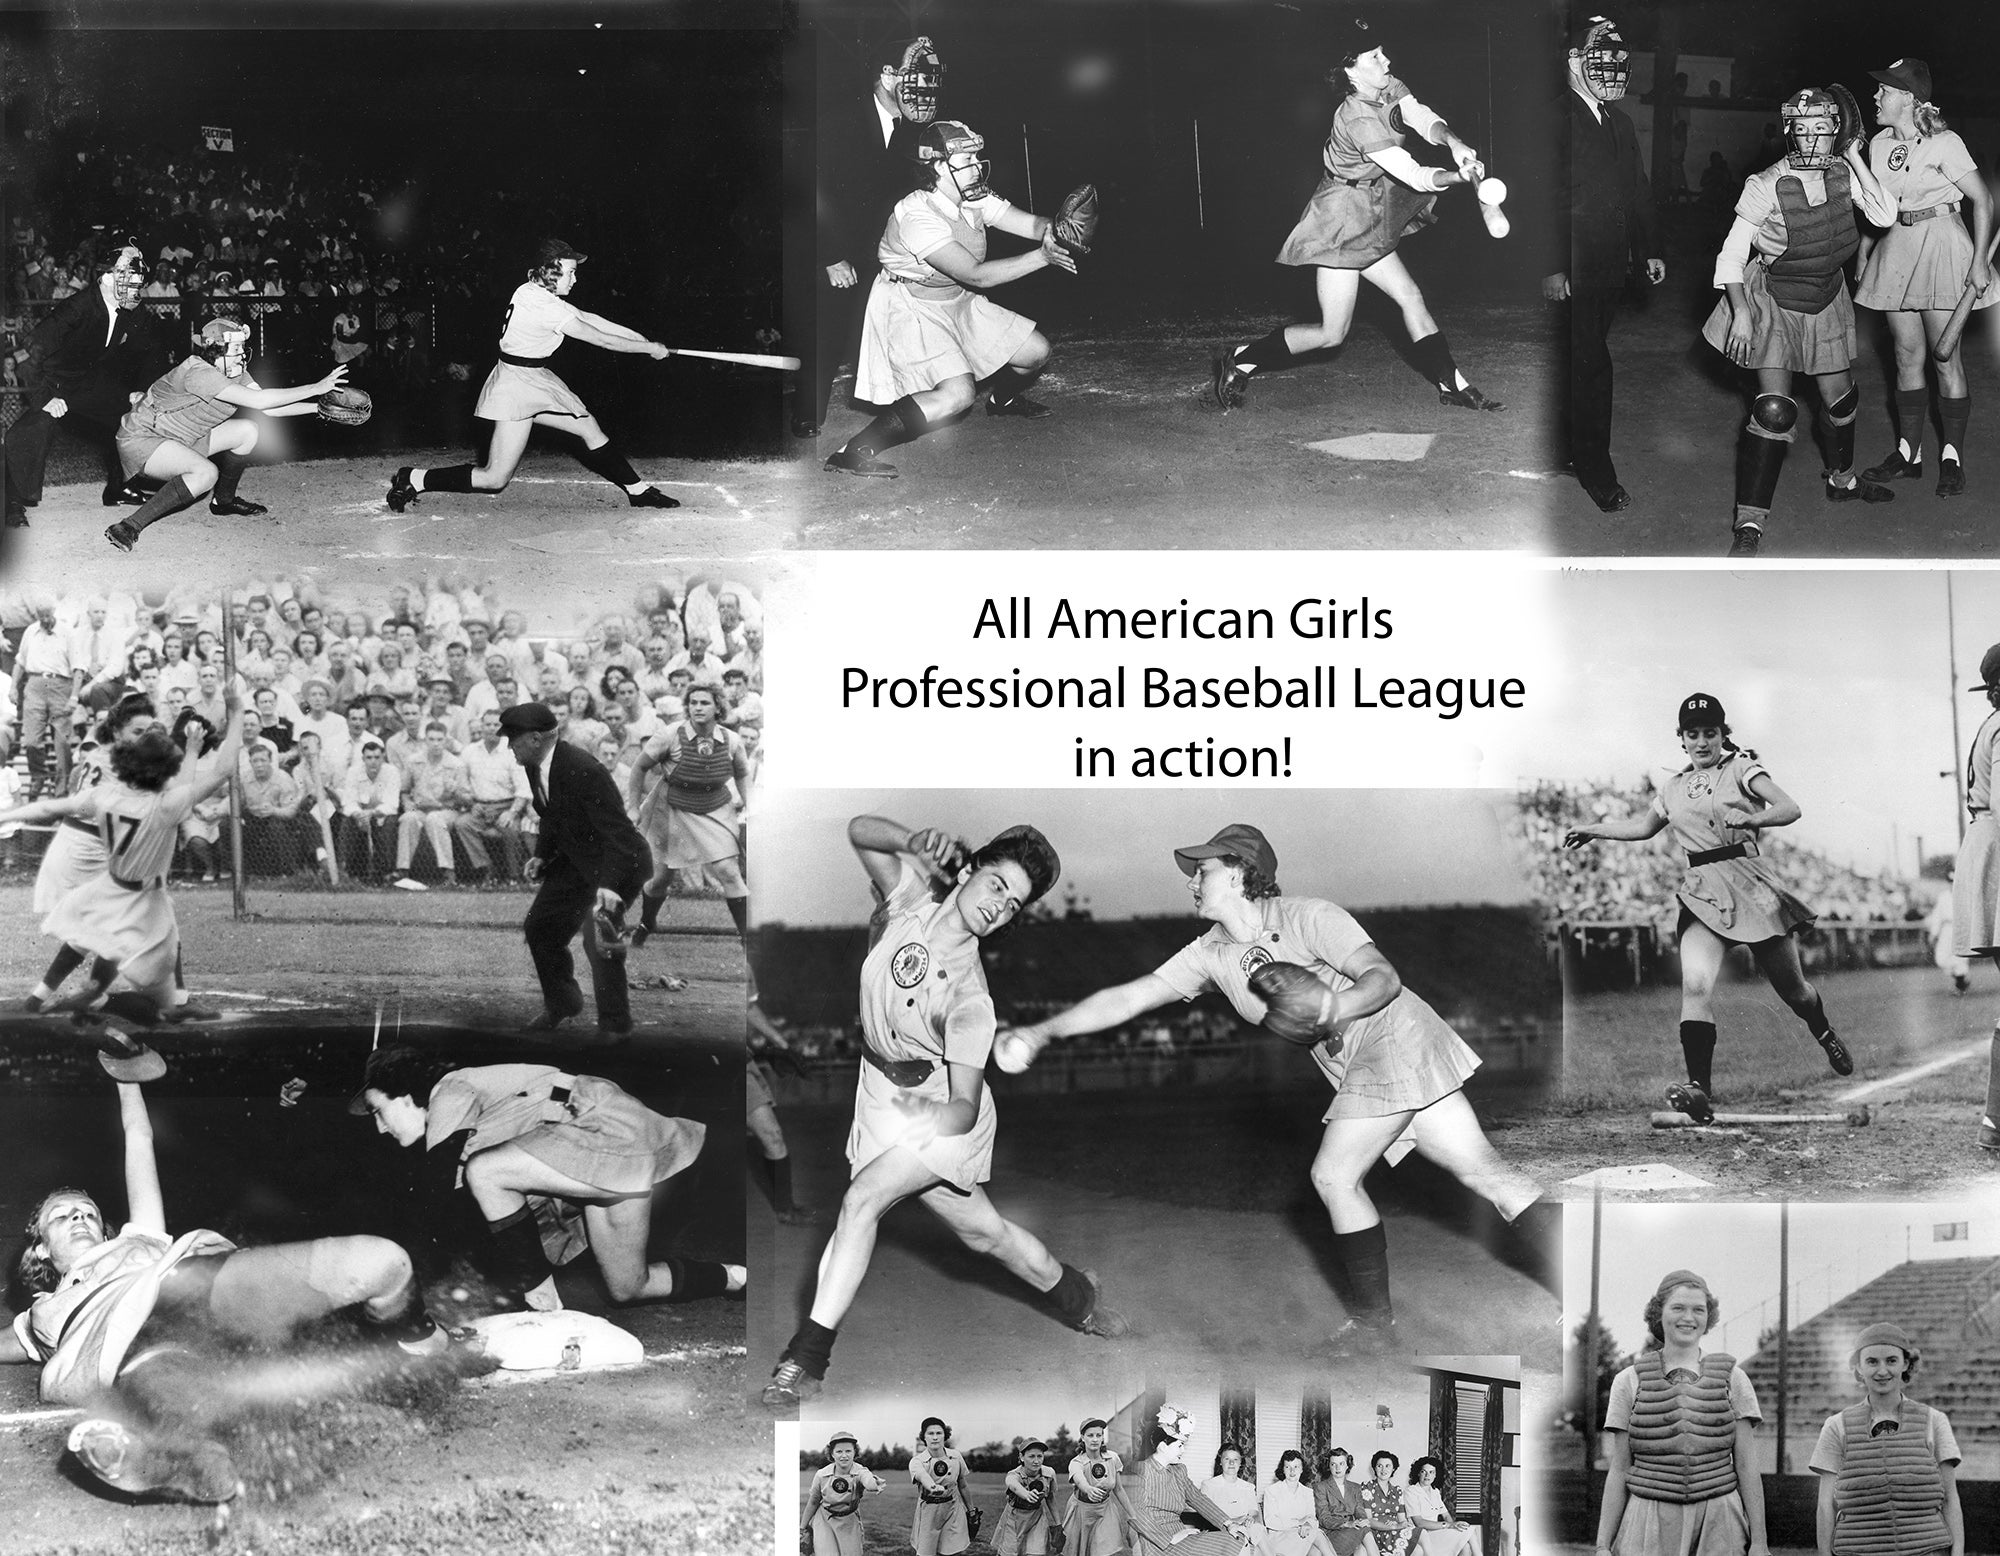 AAGPBL launched with great fanfare in 1943